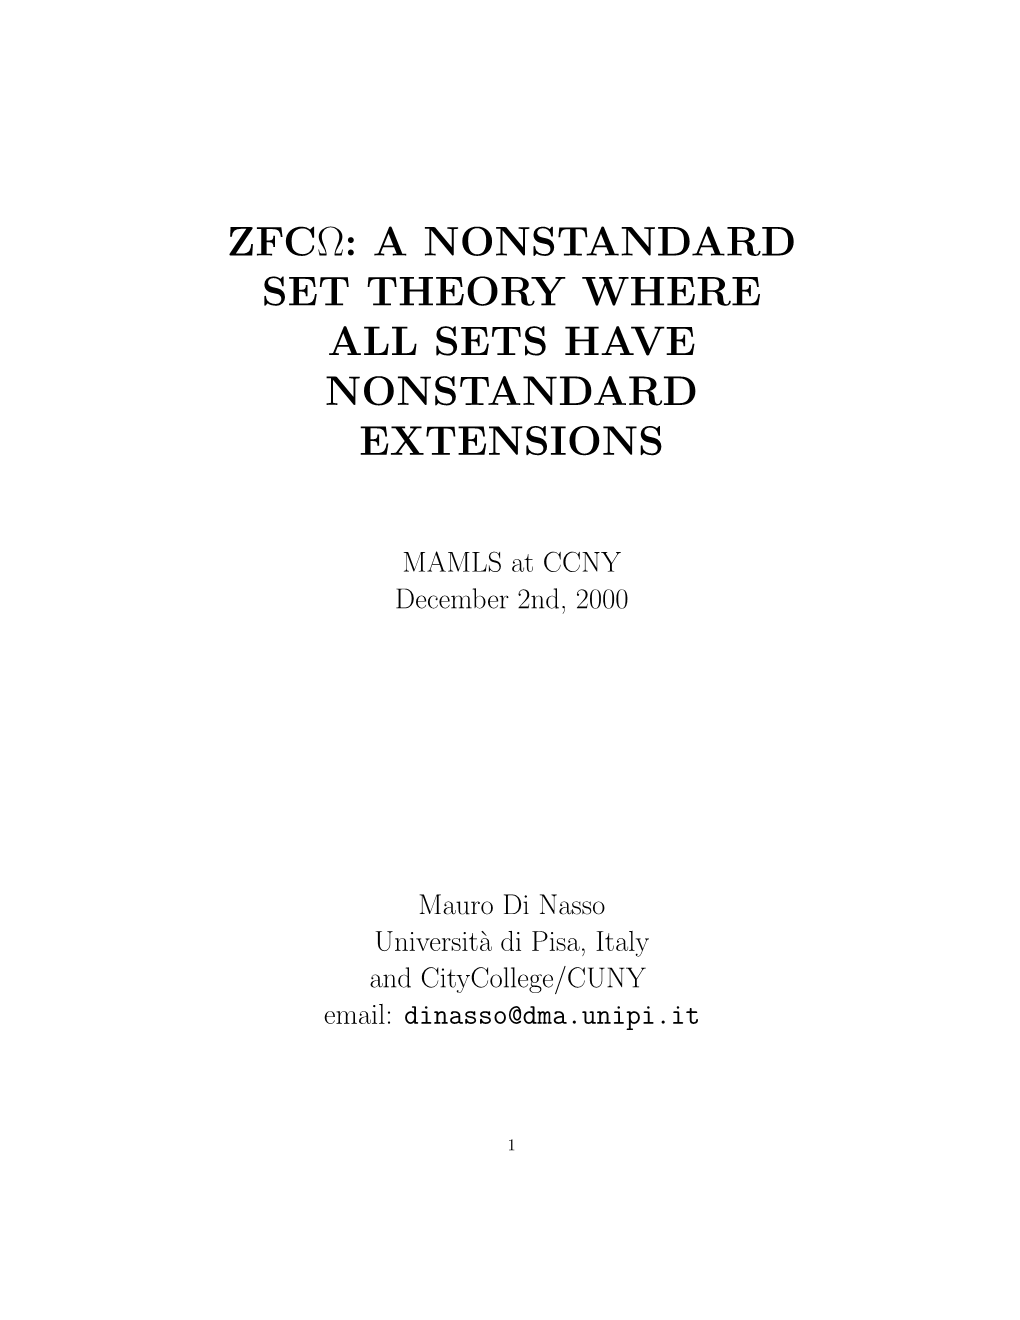 Zfcω: a Nonstandard Set Theory Where All Sets Have Nonstandard Extensions